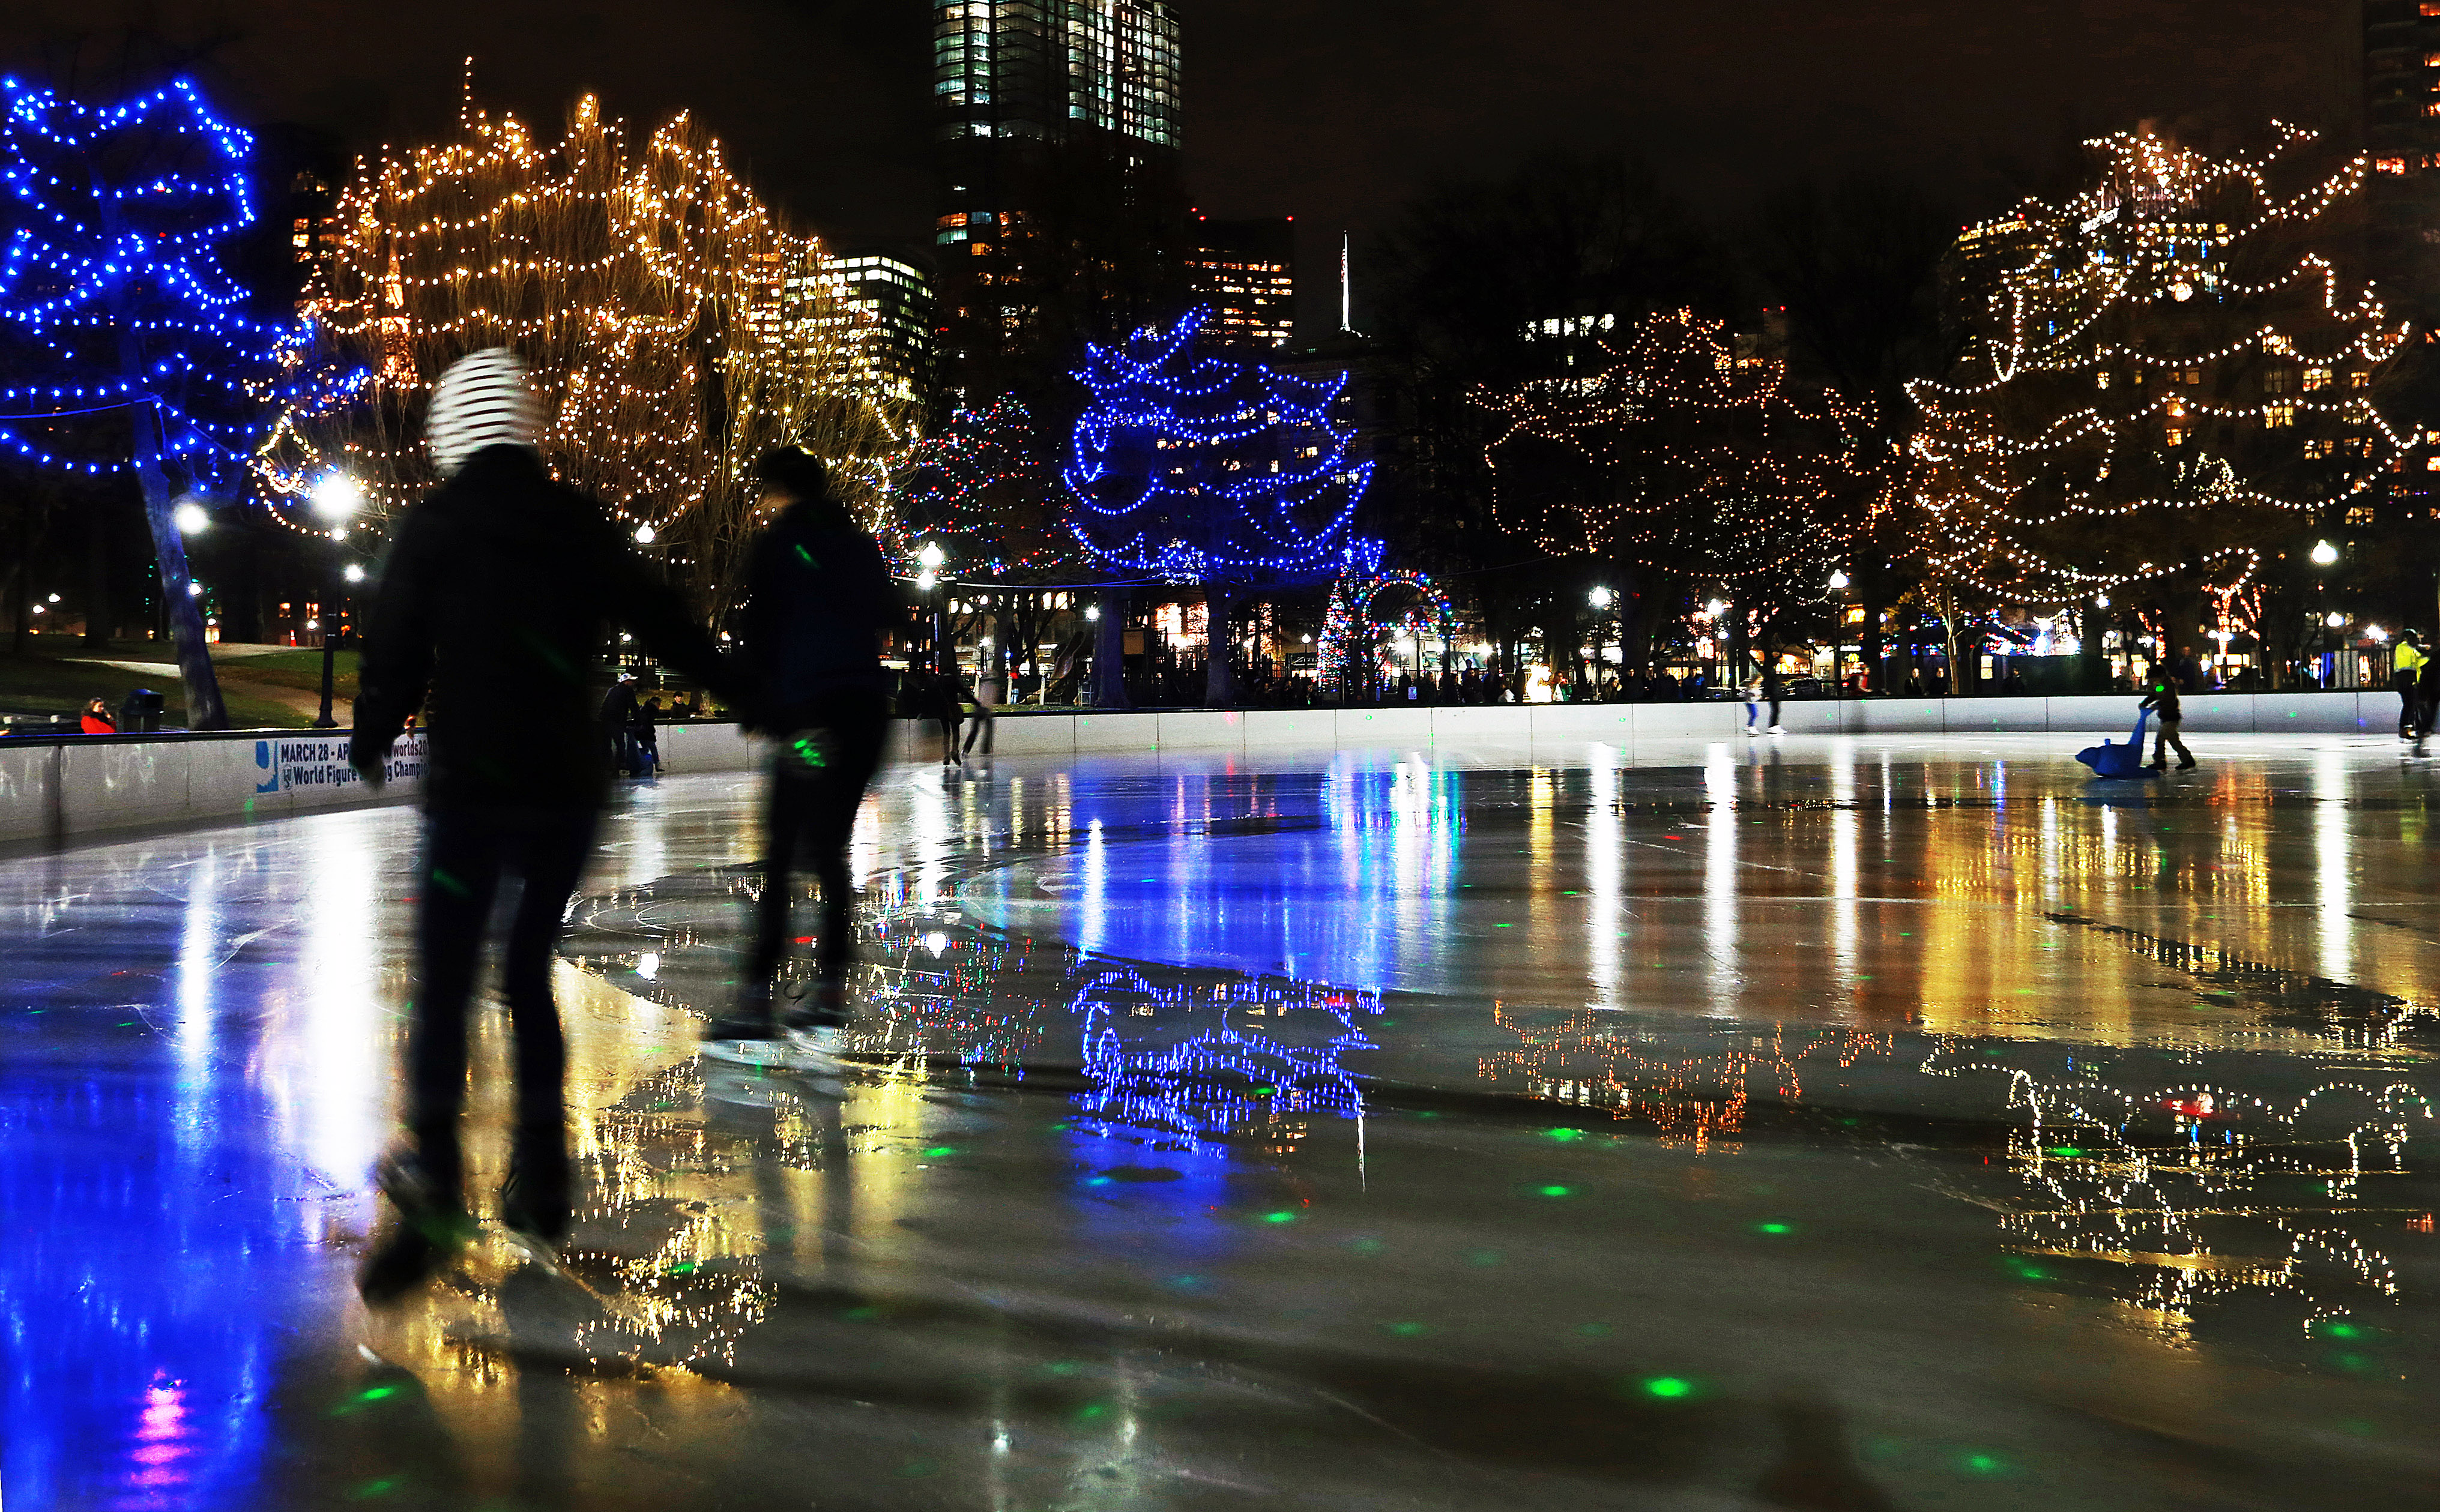 People ice-skating at night, surrounded by illuminated trees.